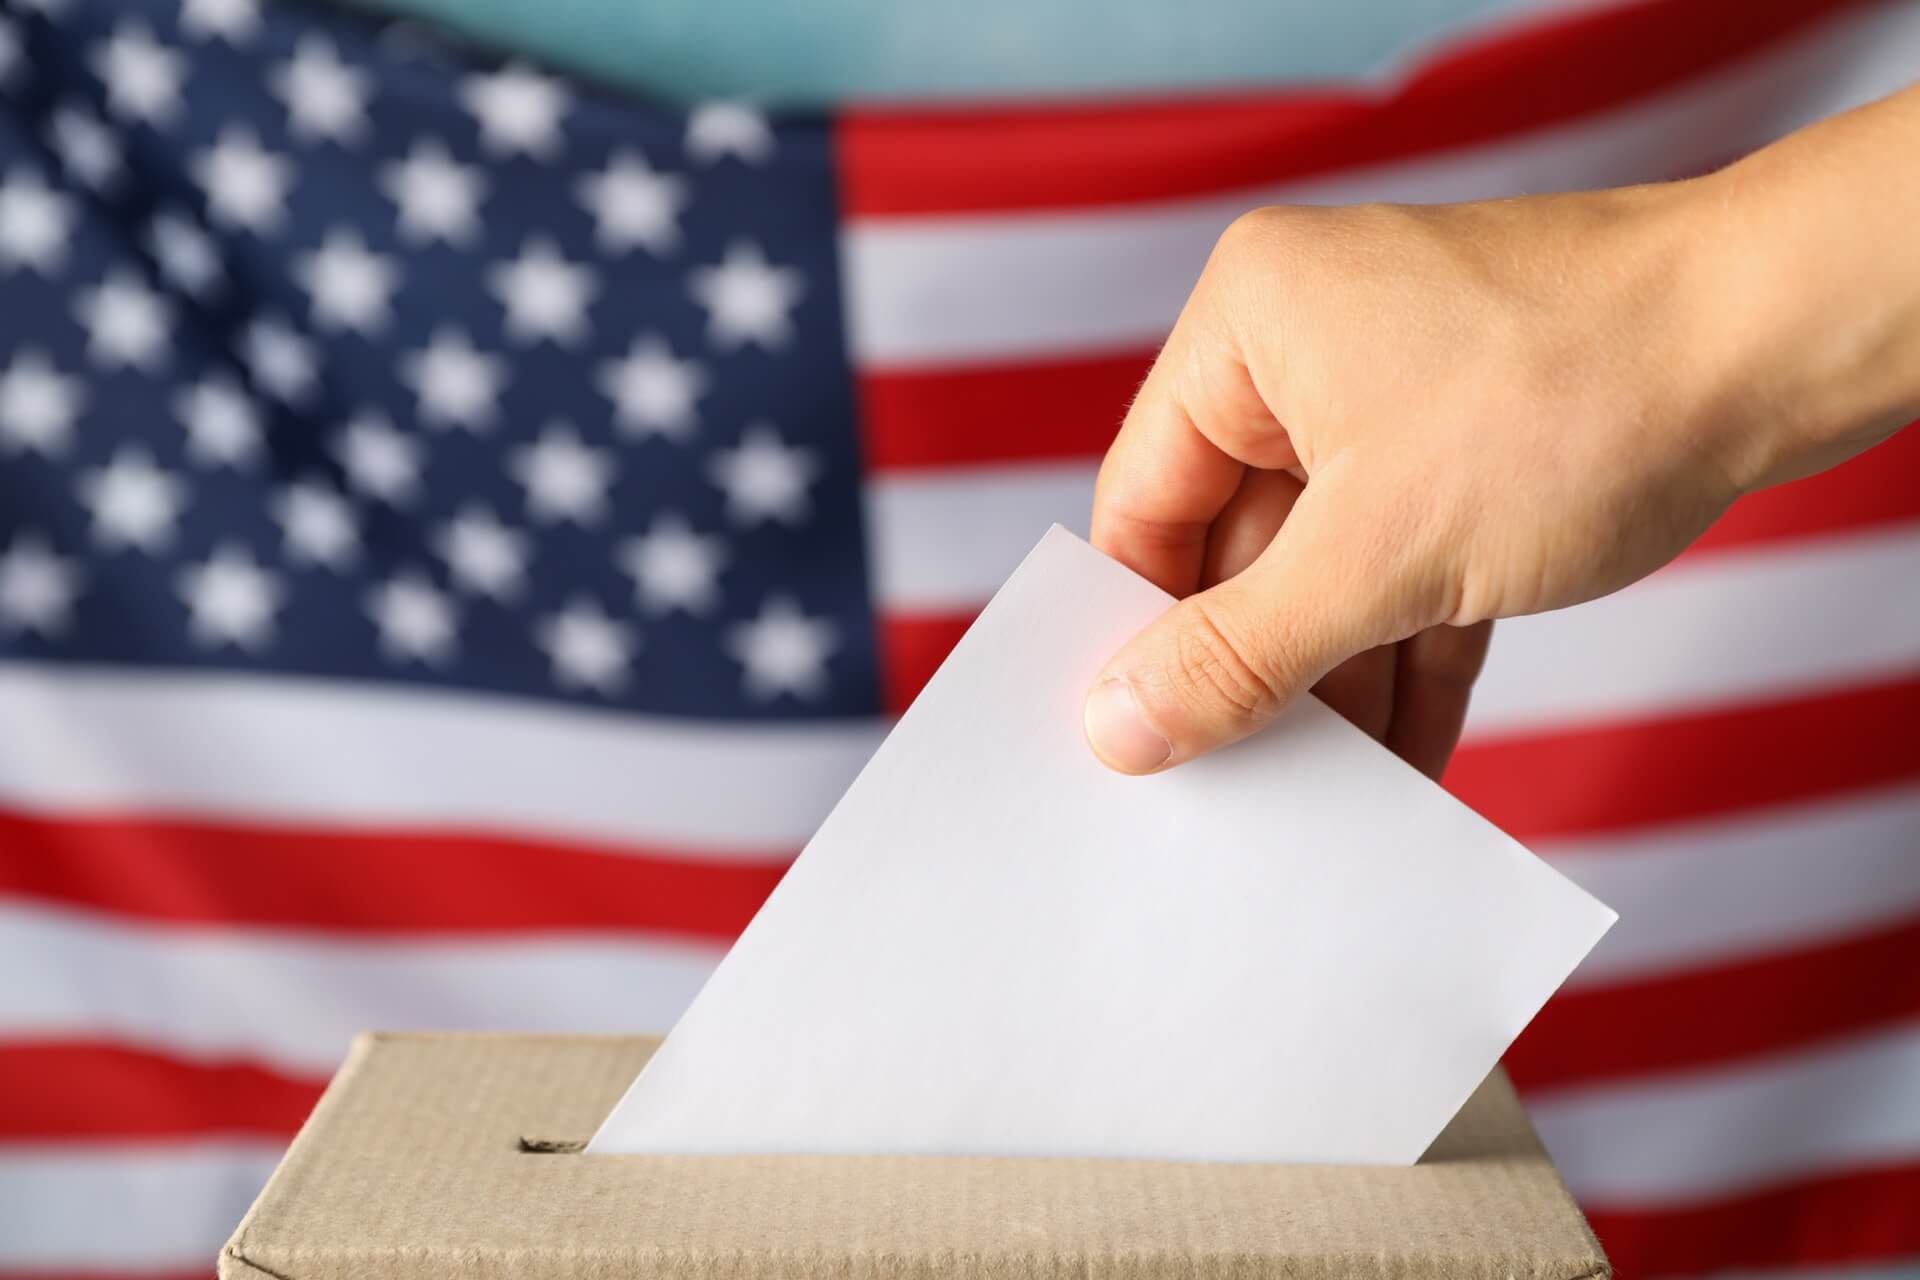 man-putting-ballot-into-voting-box-against-american-flag